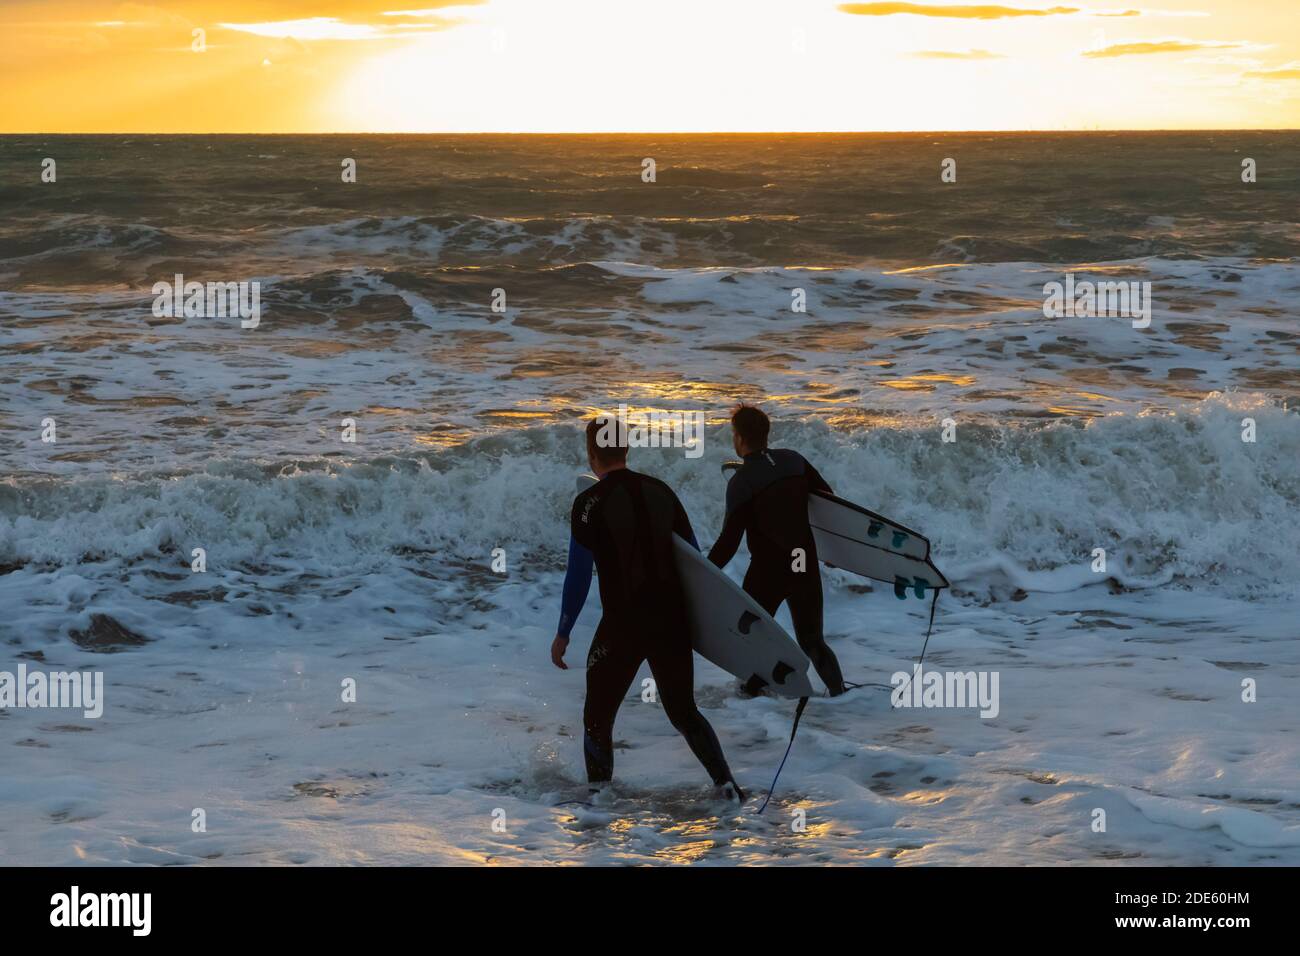 England, East Sussex, Eastbourne, Birling Gap, The Seven Sisters Cliffs and Beach, Two Male Surfers Walking on Beach Carrying Surfboards Stock Photo